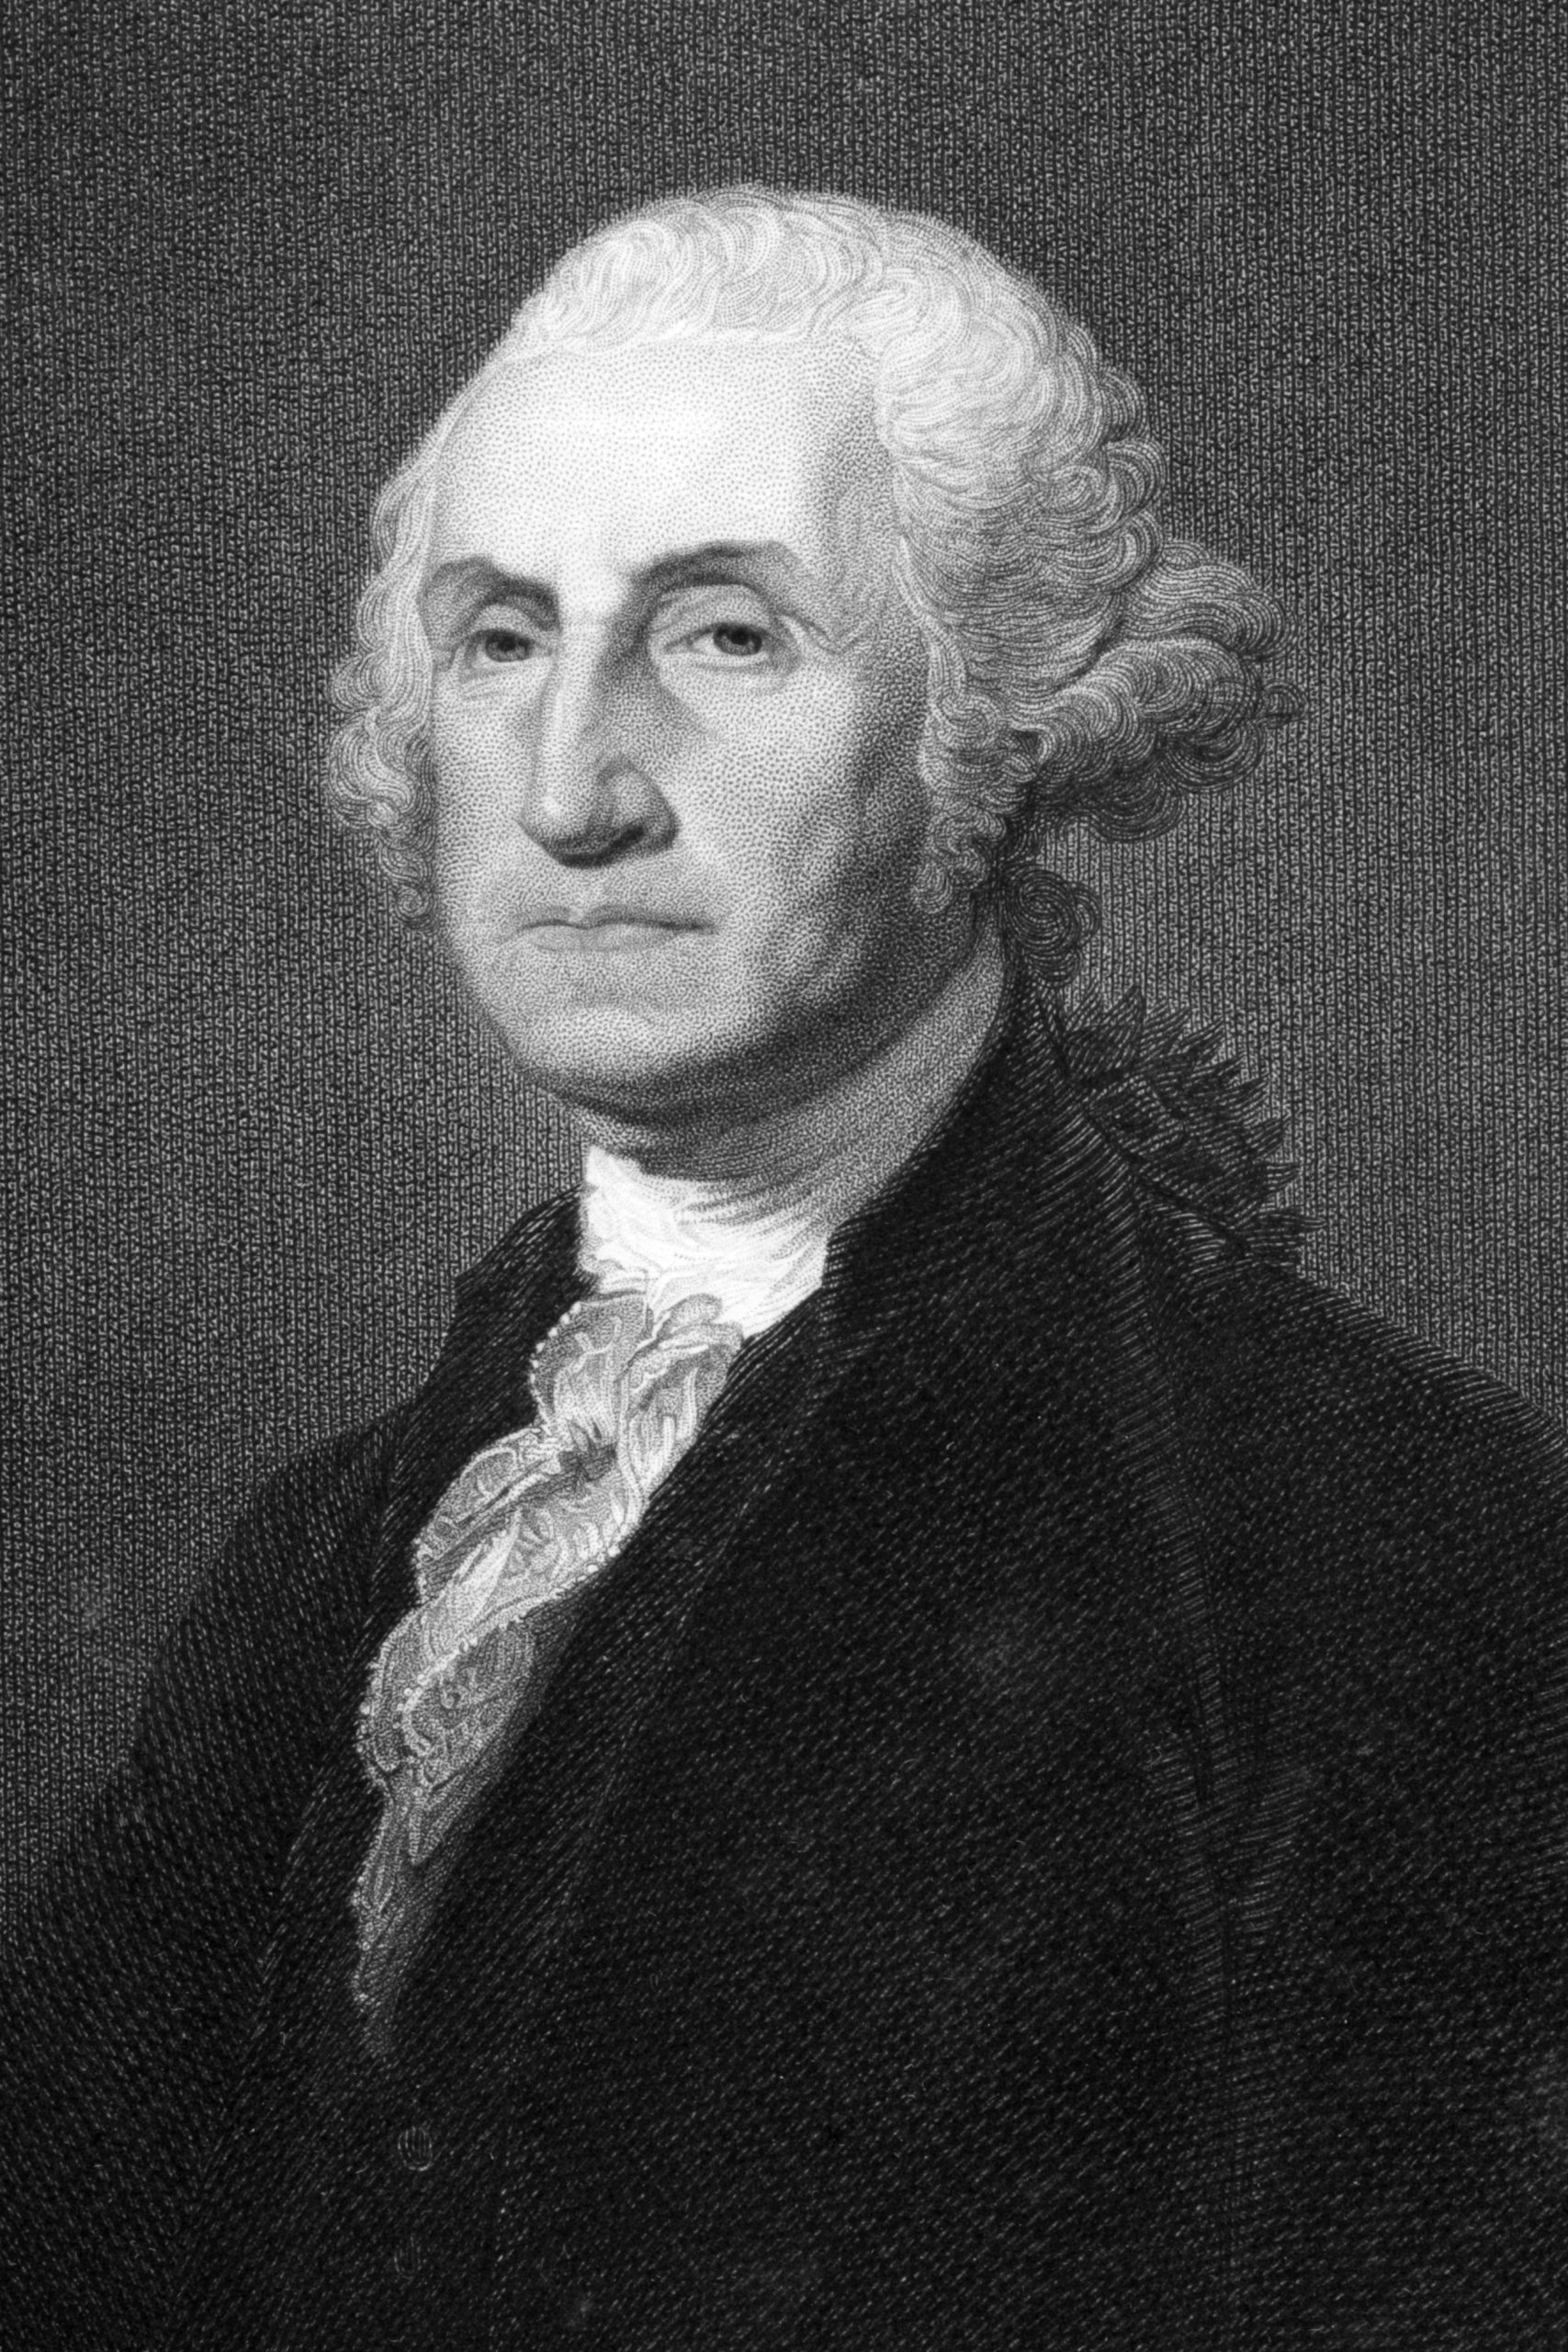 Discovering the Founding Father: 10 Little-Known Facts About George Washington